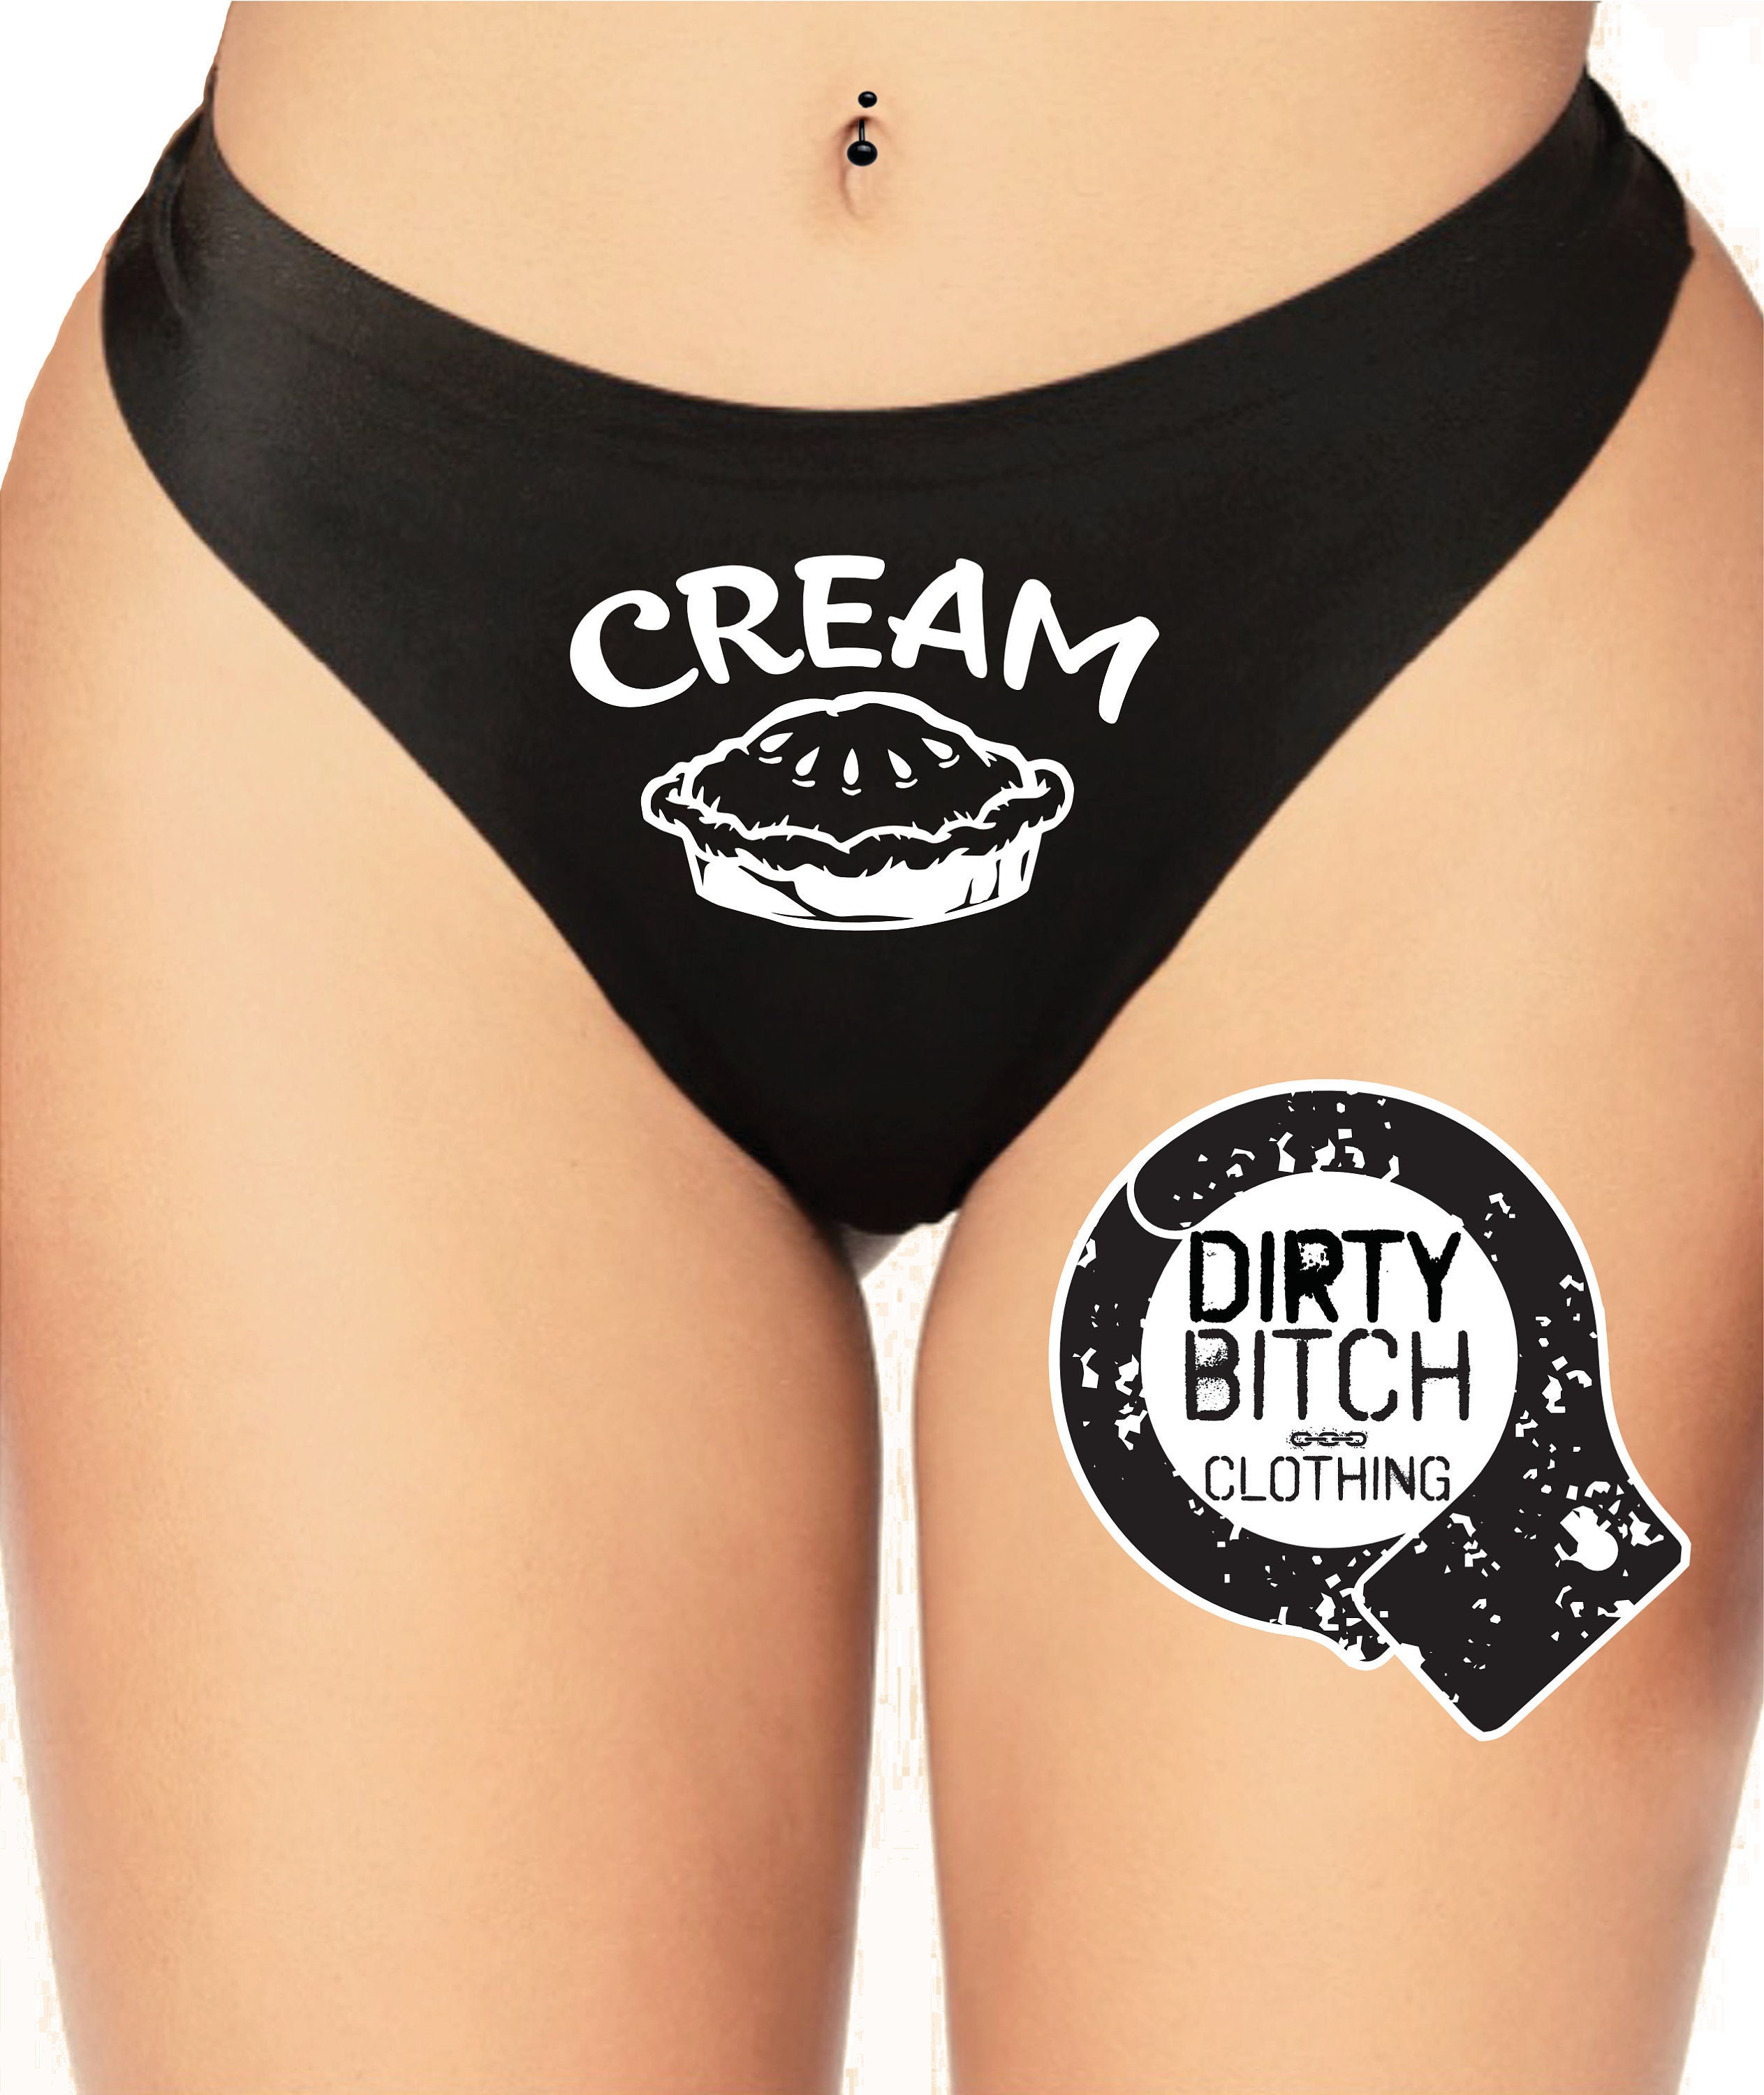 Cream Pie Logo Adult Knickers Fetish Hotwife Cuckold picture picture